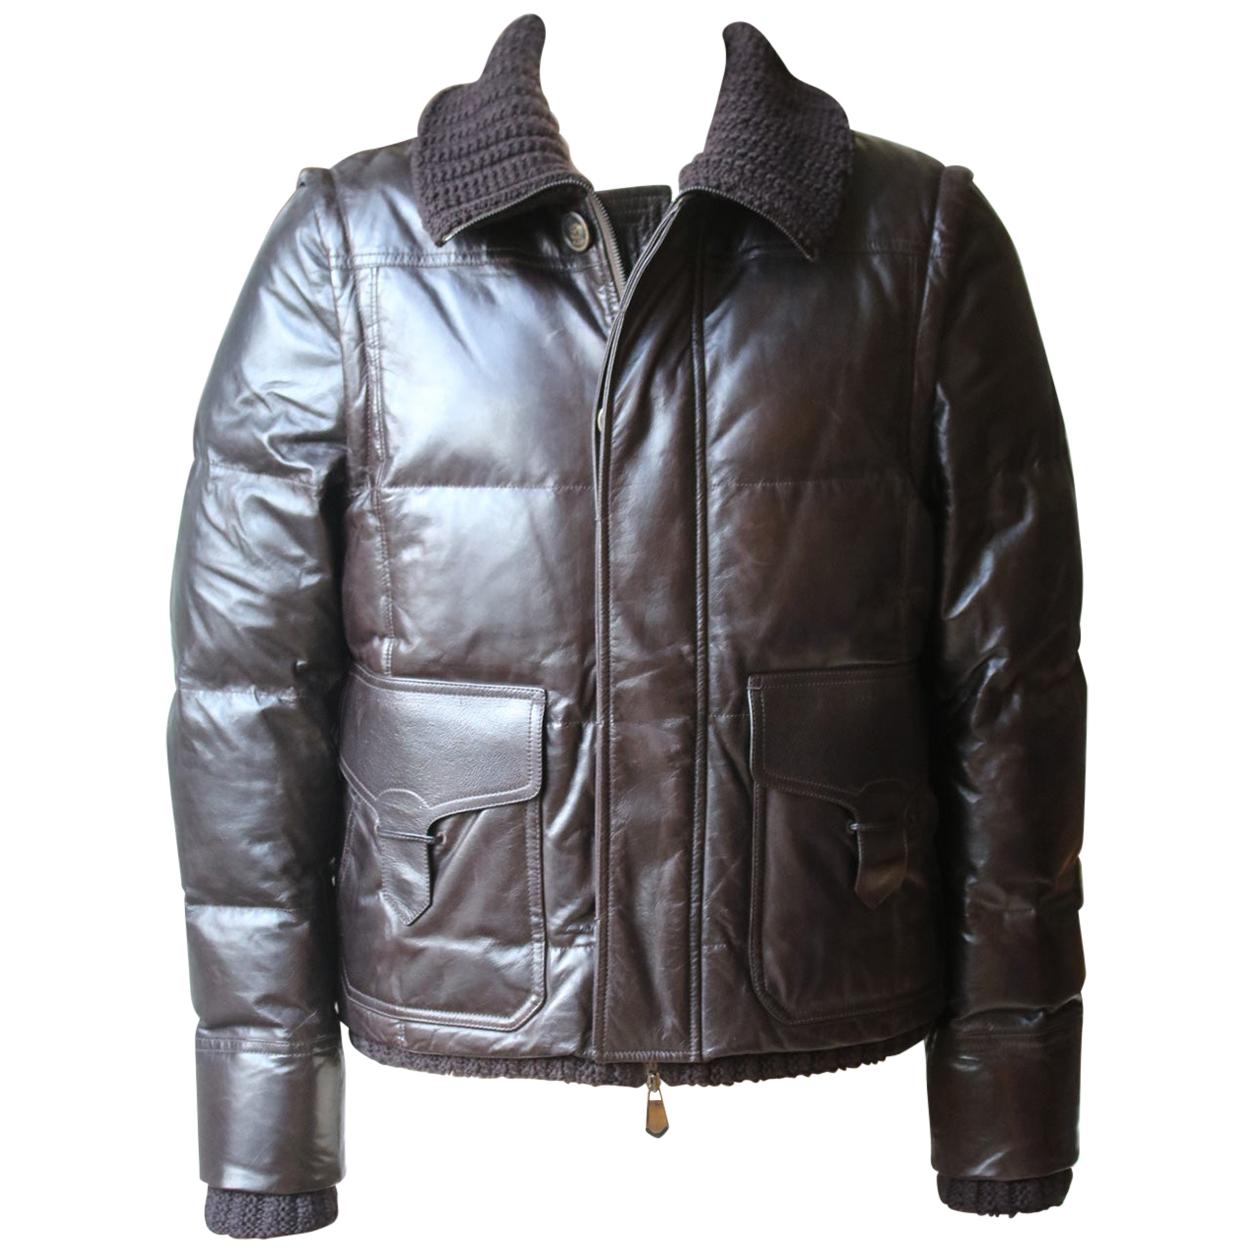 Berluti Padded Leather Jacket with Detachable Sleeves